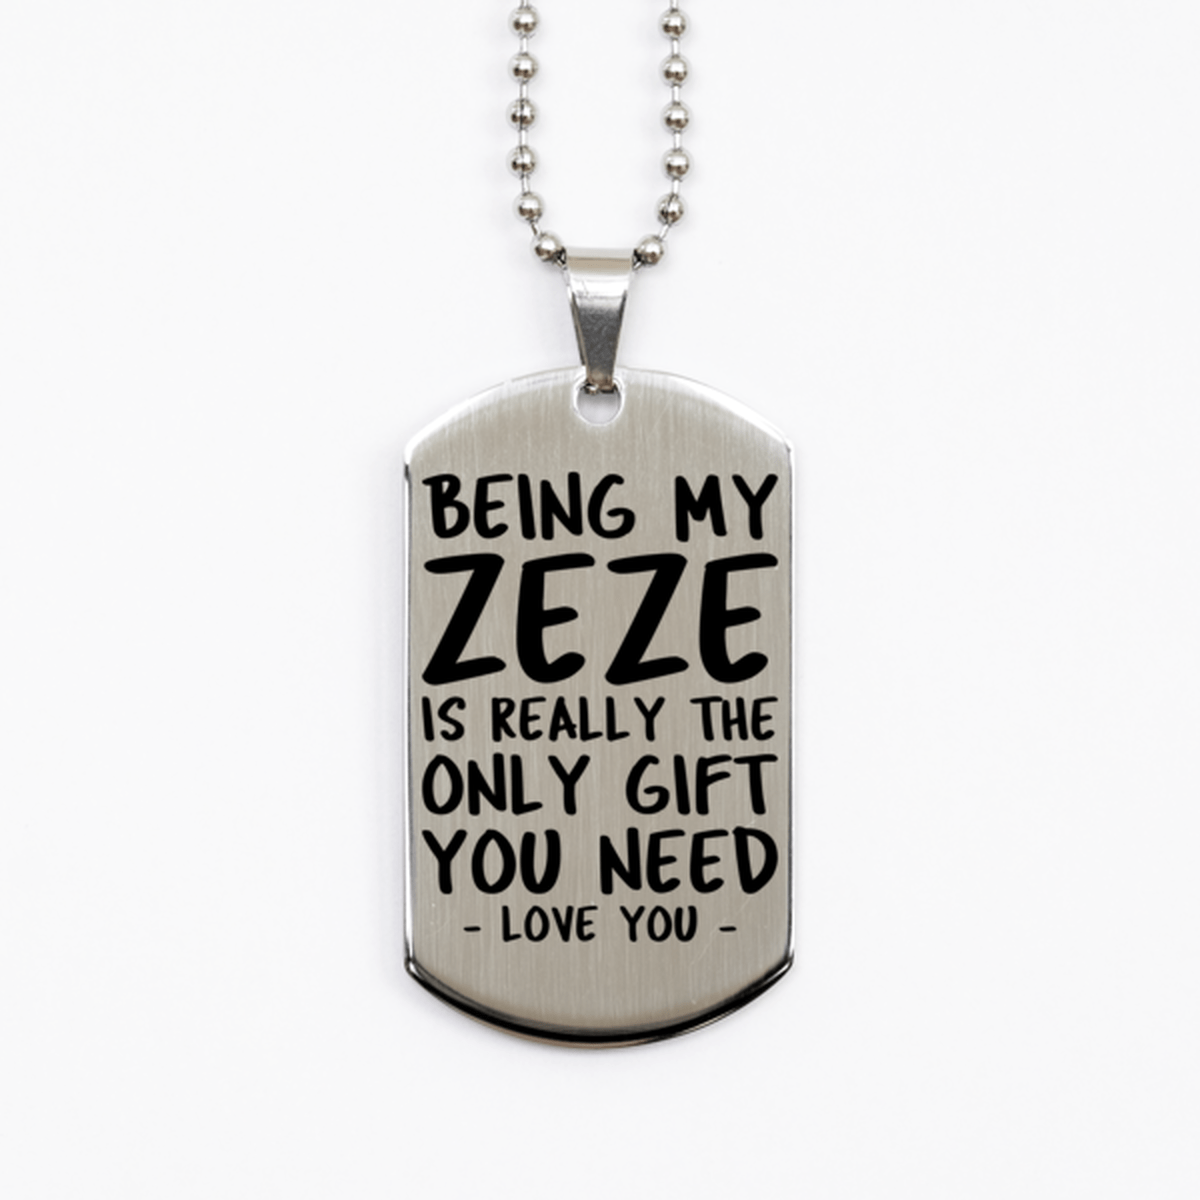 Funny Zeze Silver Dog Tag Necklace, Being My Zeze Is Really the Only Gift You Need, Best Birthday Gifts for Zeze